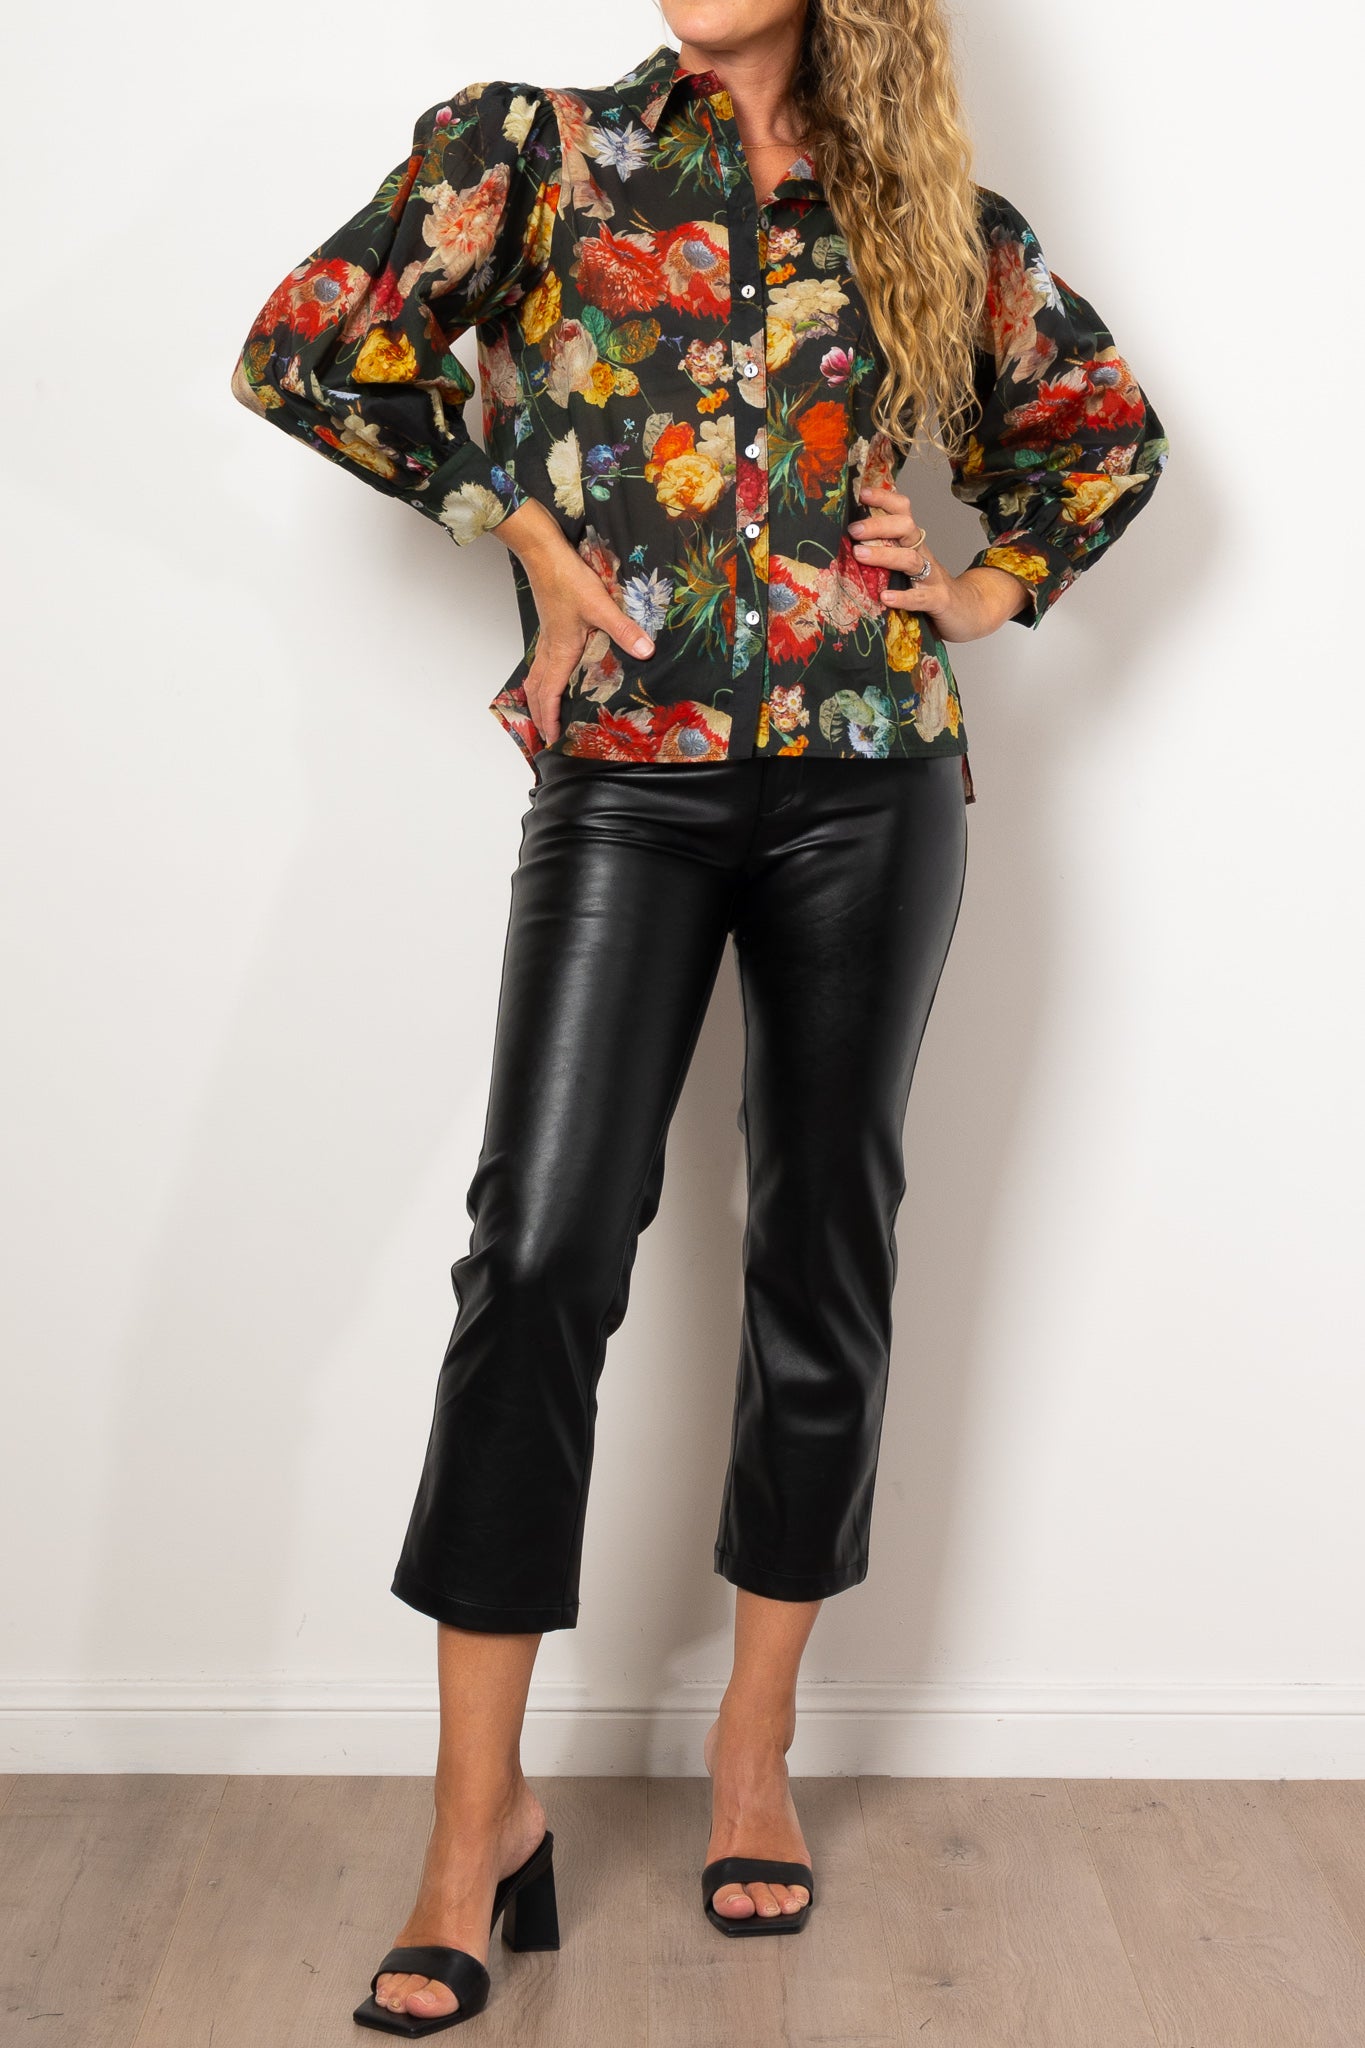 COOP by Trelise Cooper Autumn Leaves Shirt